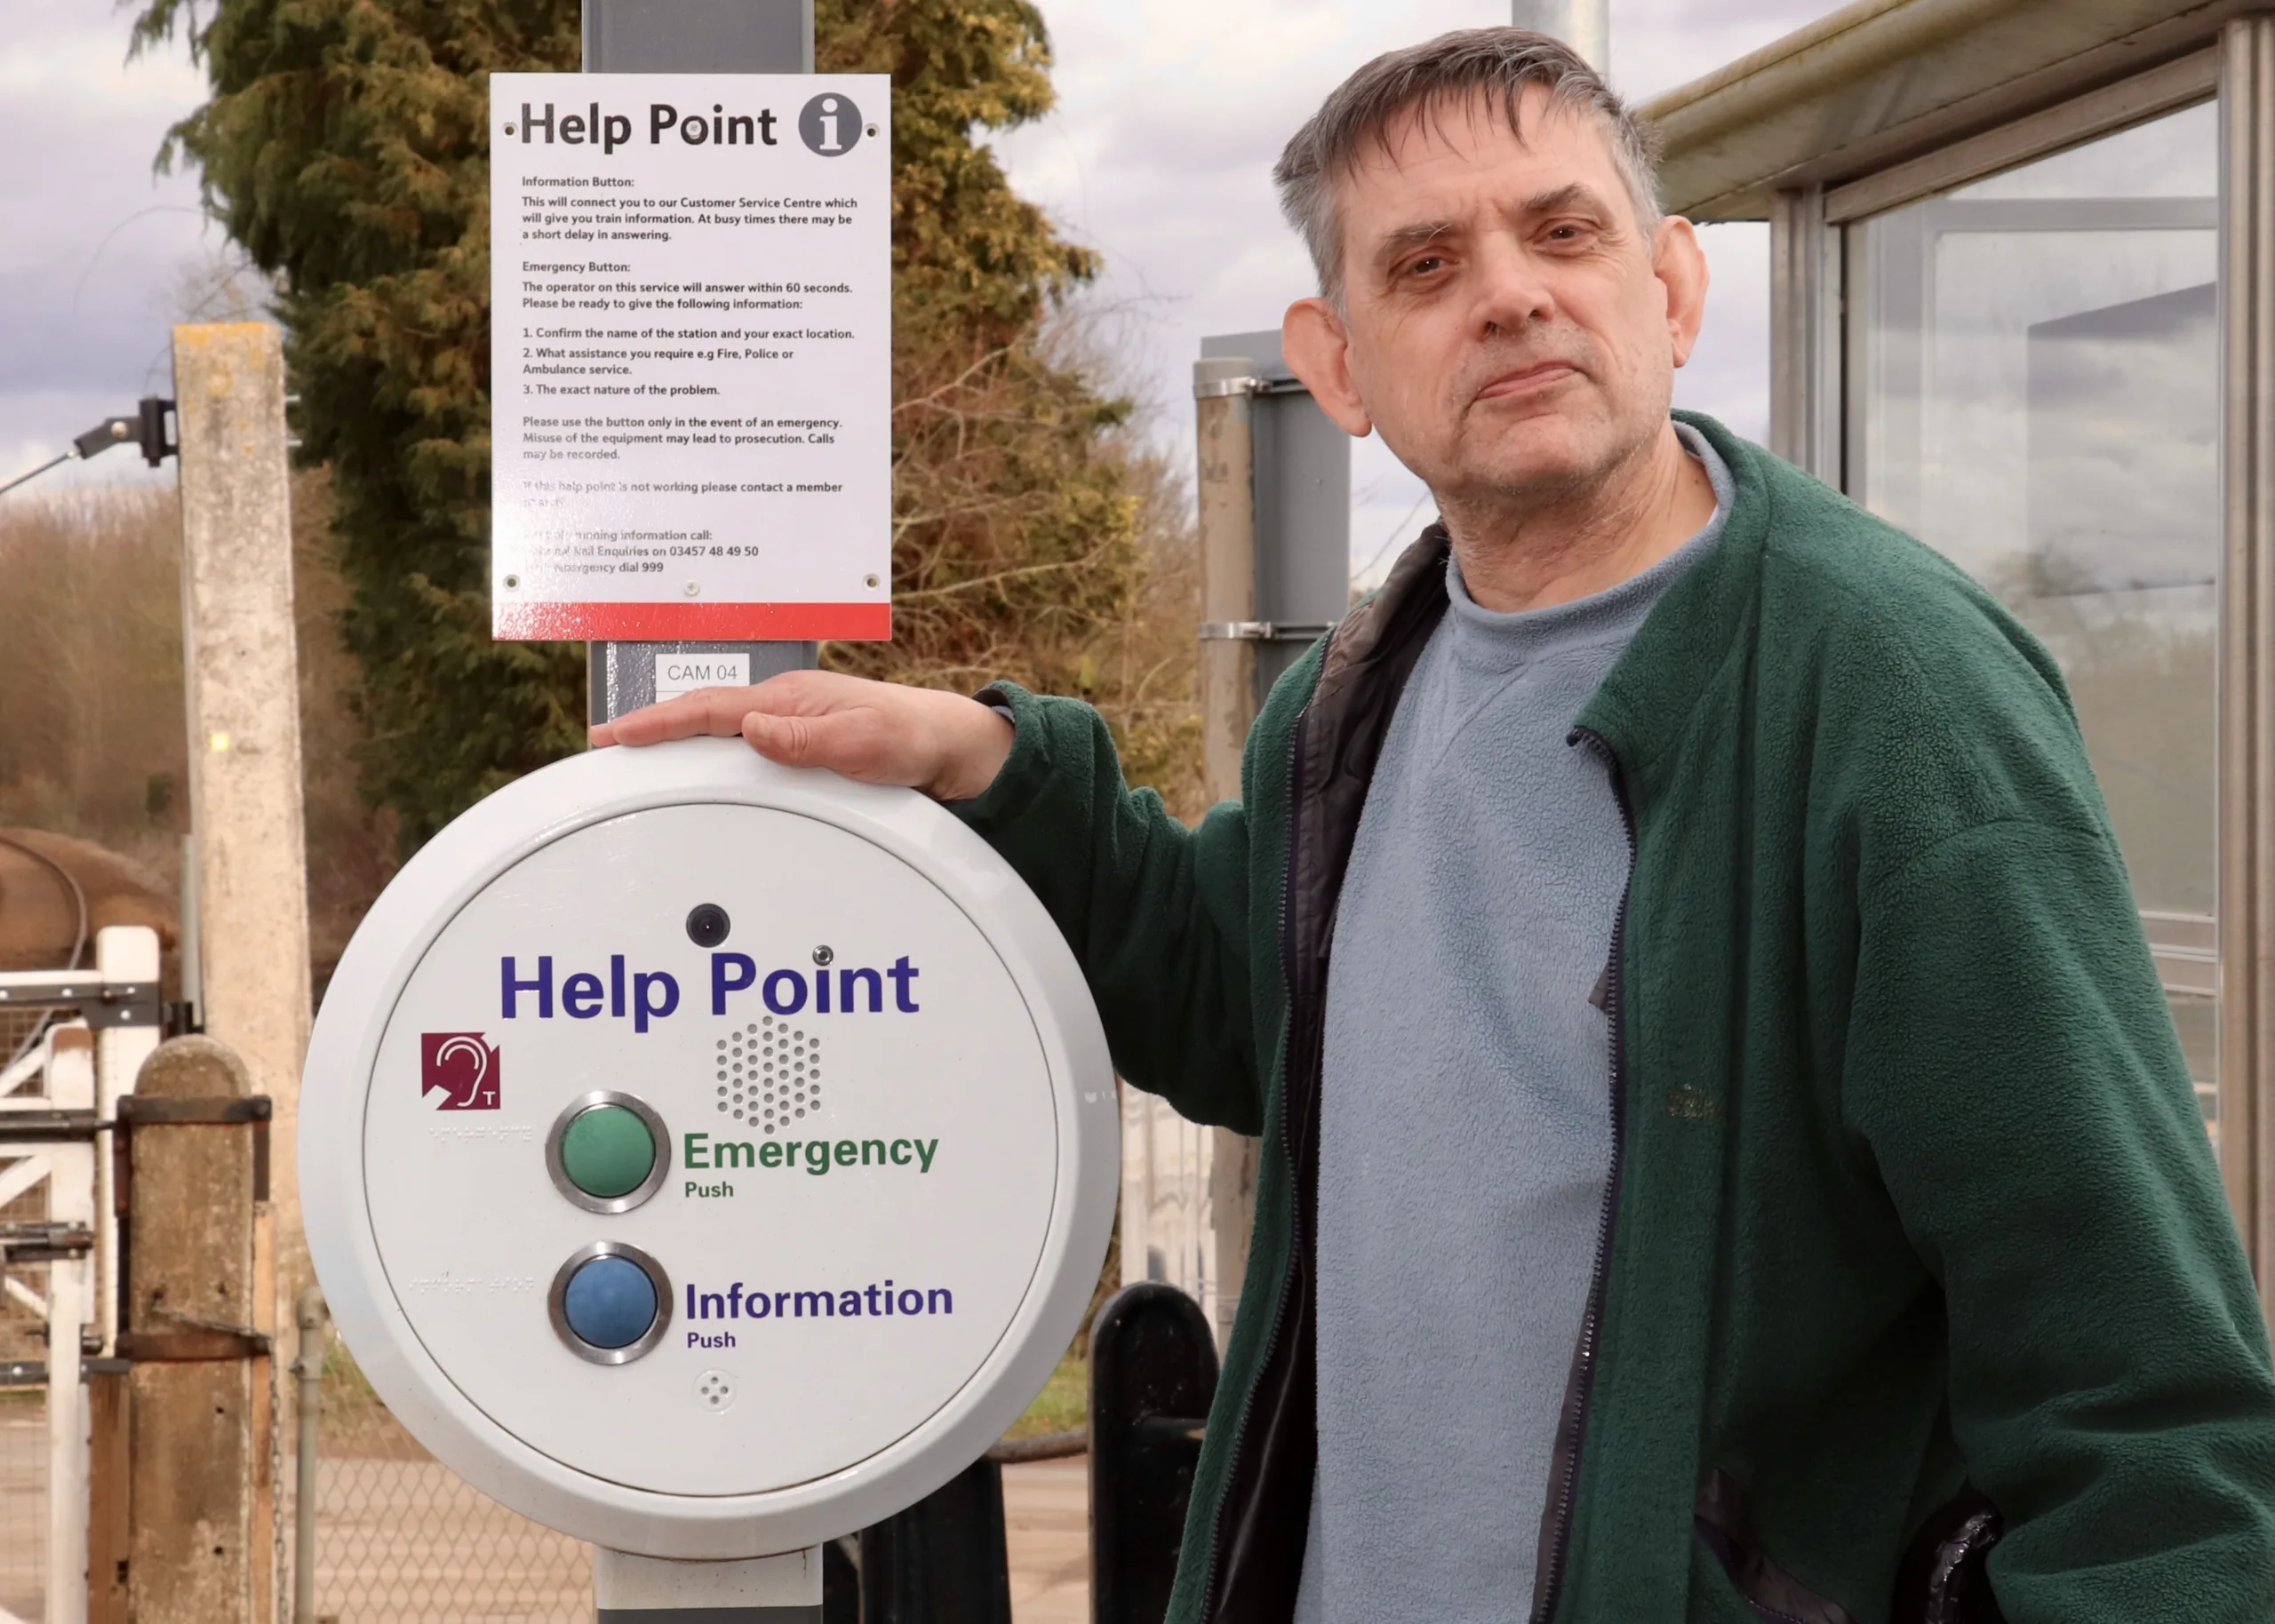 • Steve O’Dell at Dullingham station which offers only a 'help point'